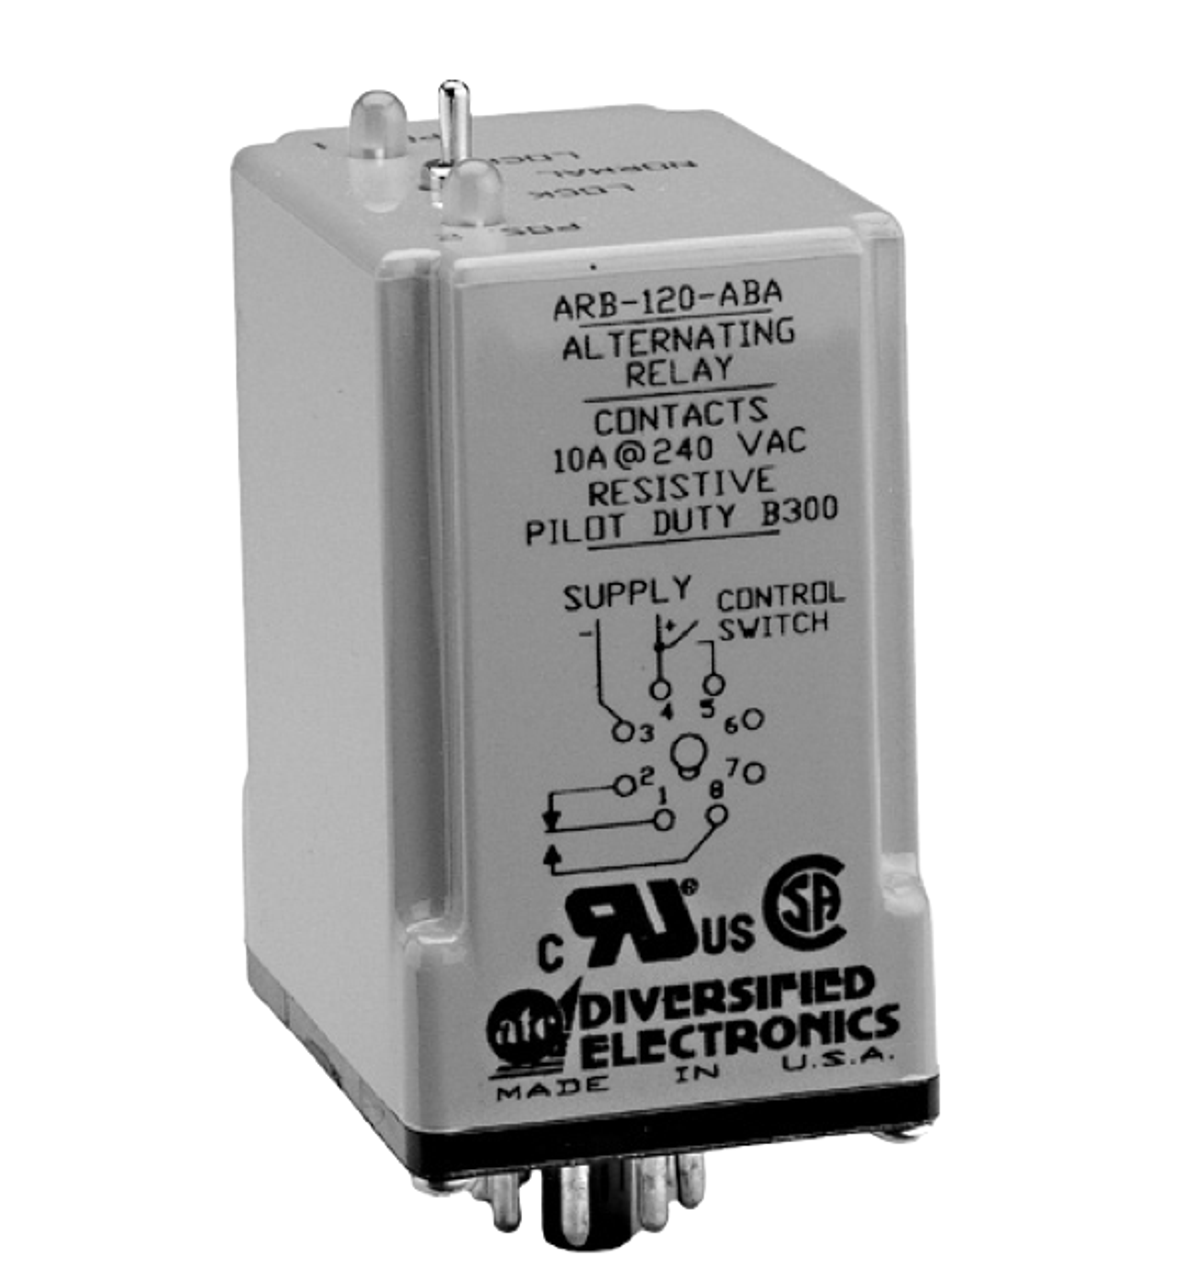 ATC Diversified - Alternating Sequencing Relay - ARB-208-AEA